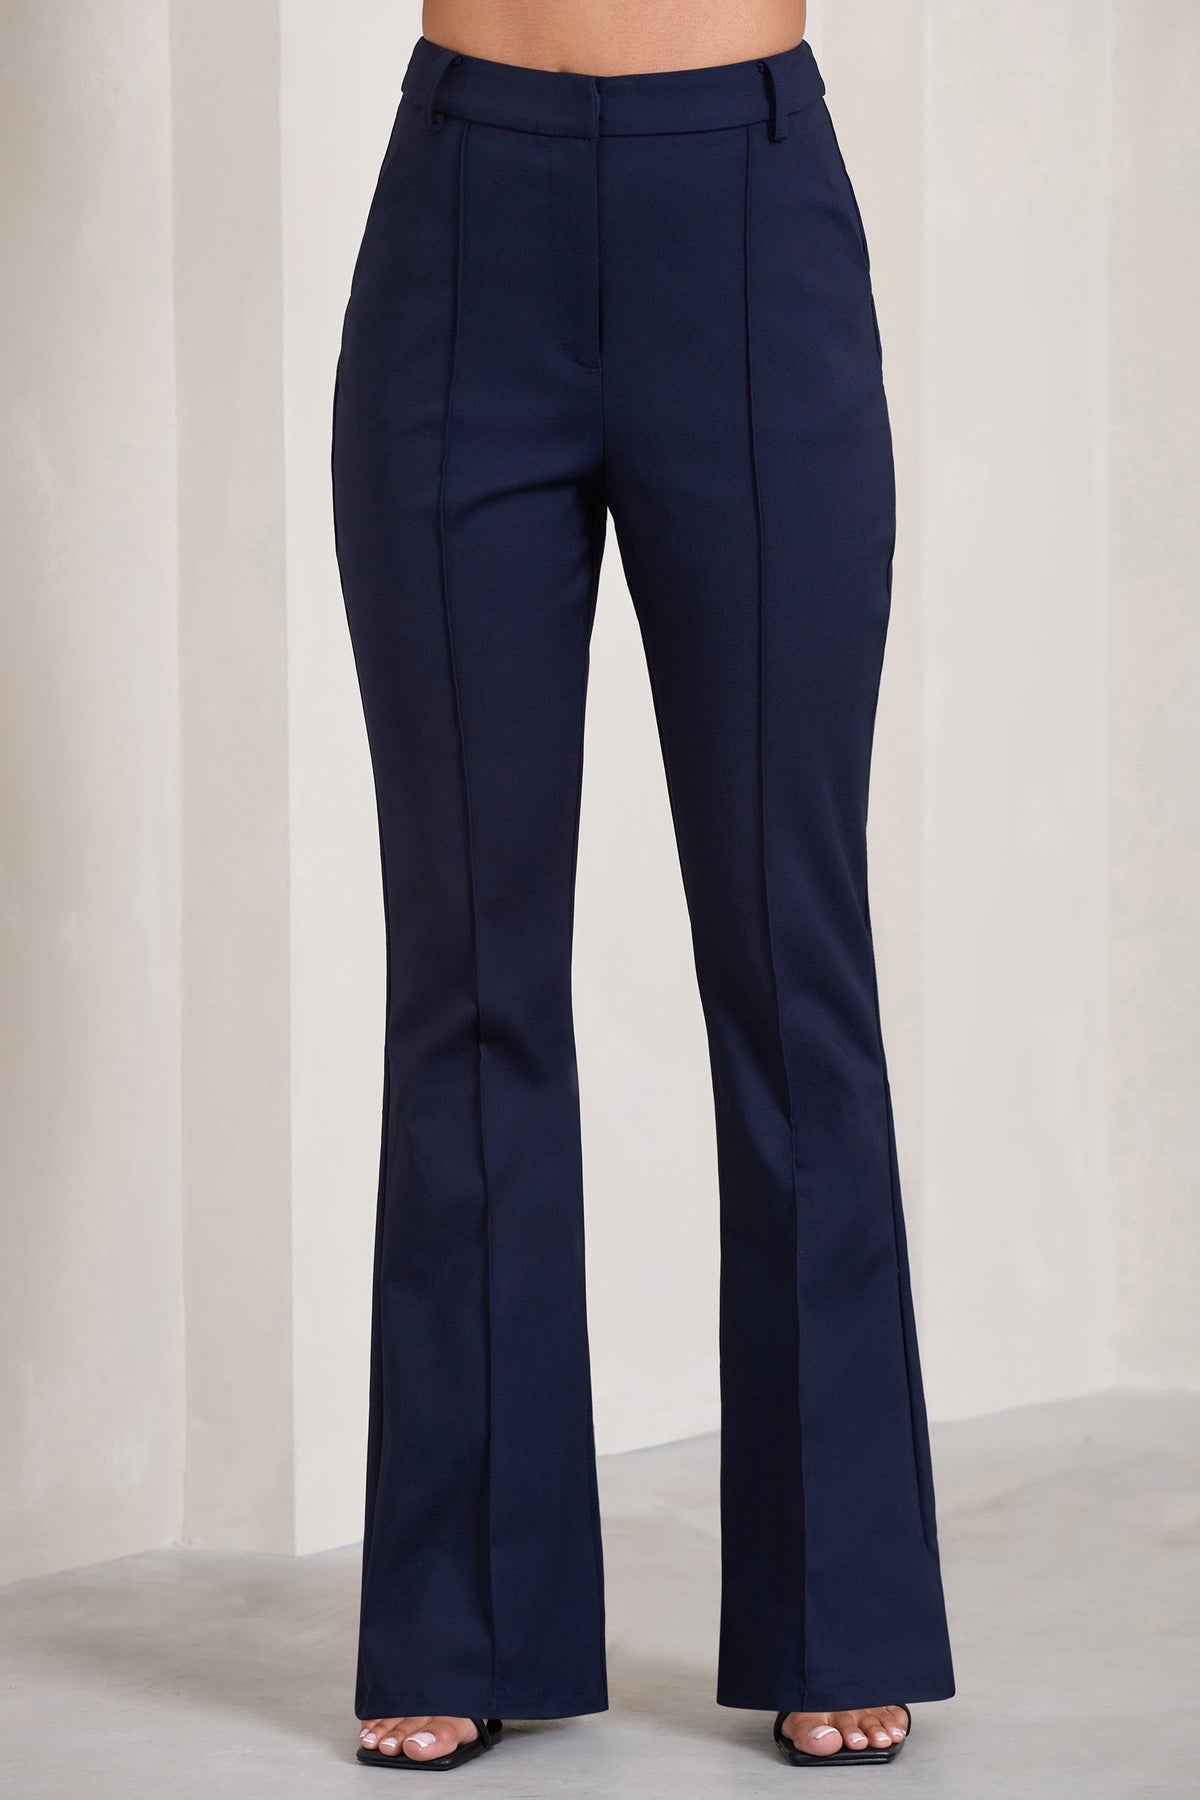 Kick It Navy Blue High-Waisted Trouser Pants | Business casual outfits,  Womens fashion casual summer, Womens fashion casual spring